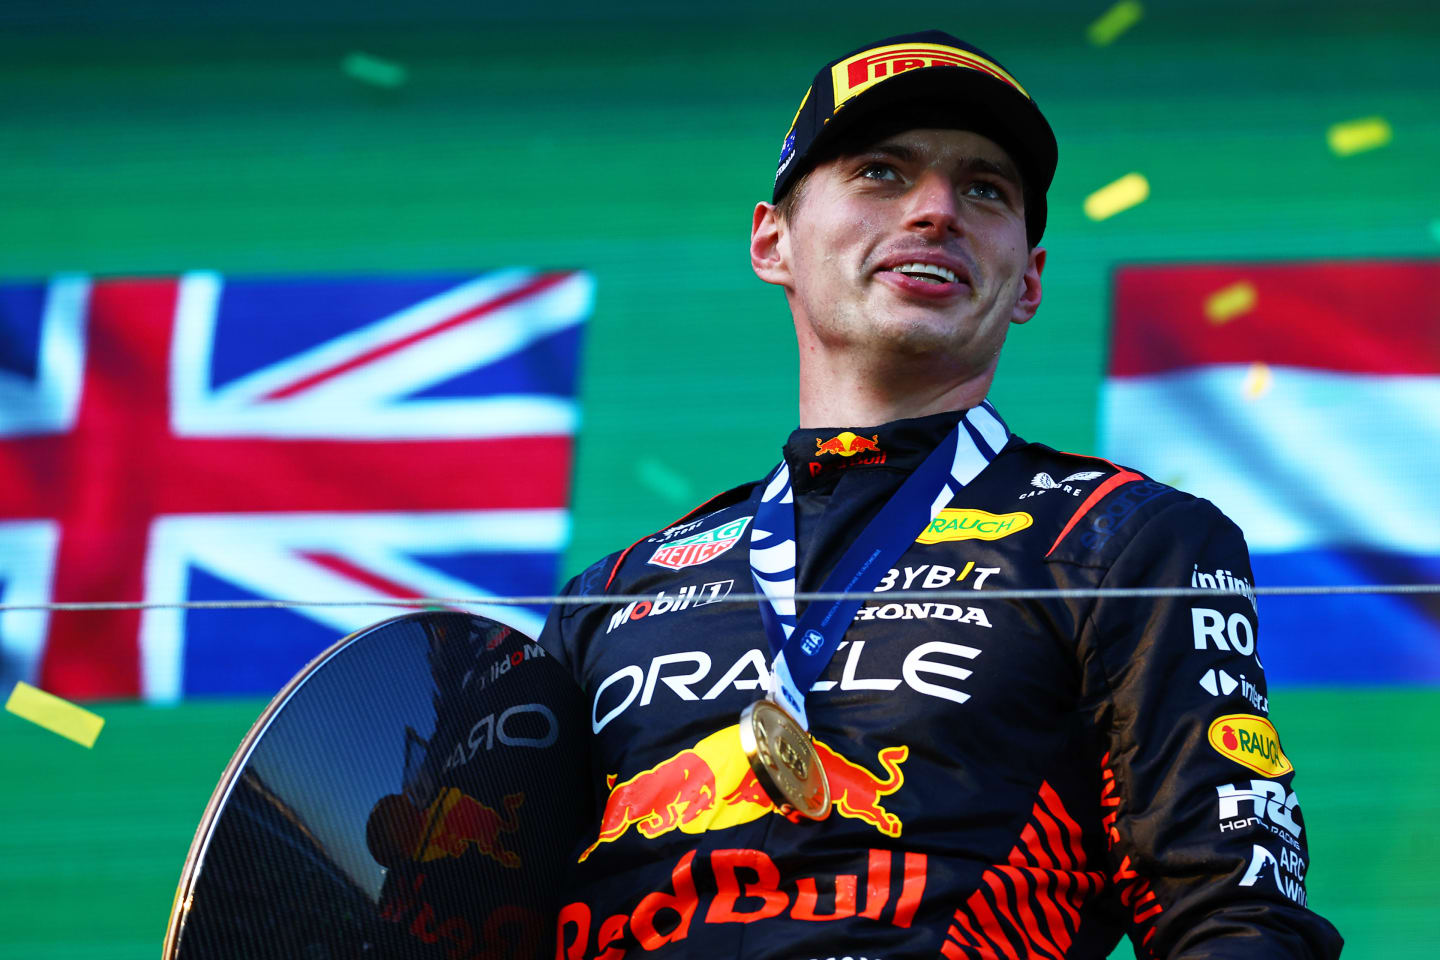 MELBOURNE, AUSTRALIA - APRIL 02: Race winner Max Verstappen of the Netherlands and Oracle Red Bull